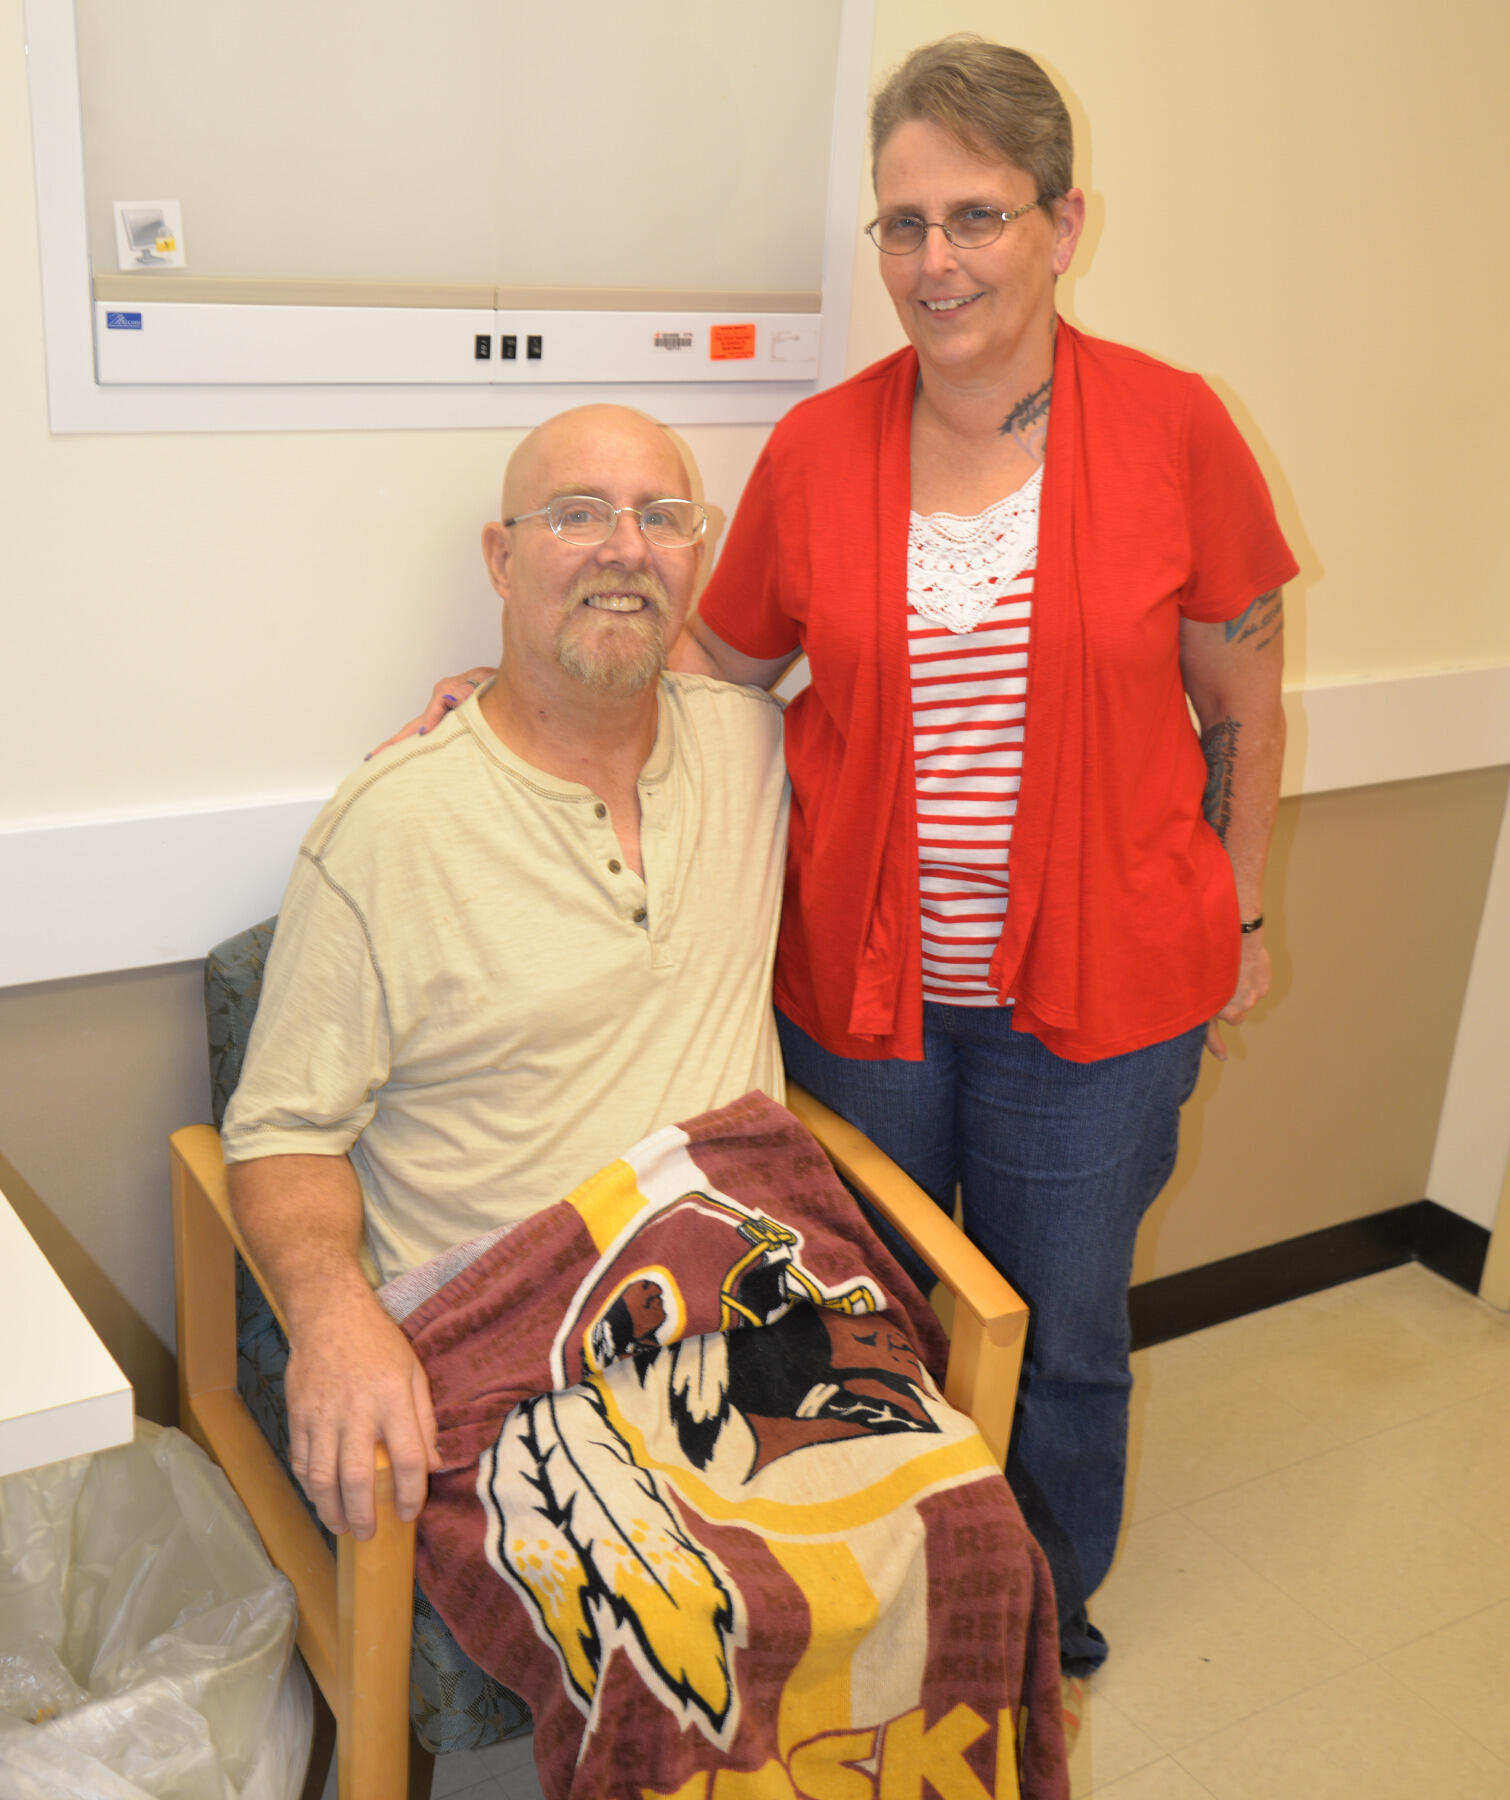 Andrew Keener and his wife, Barbara, during a follow-up visit at the VCU Hume-Lee Transplant Center.